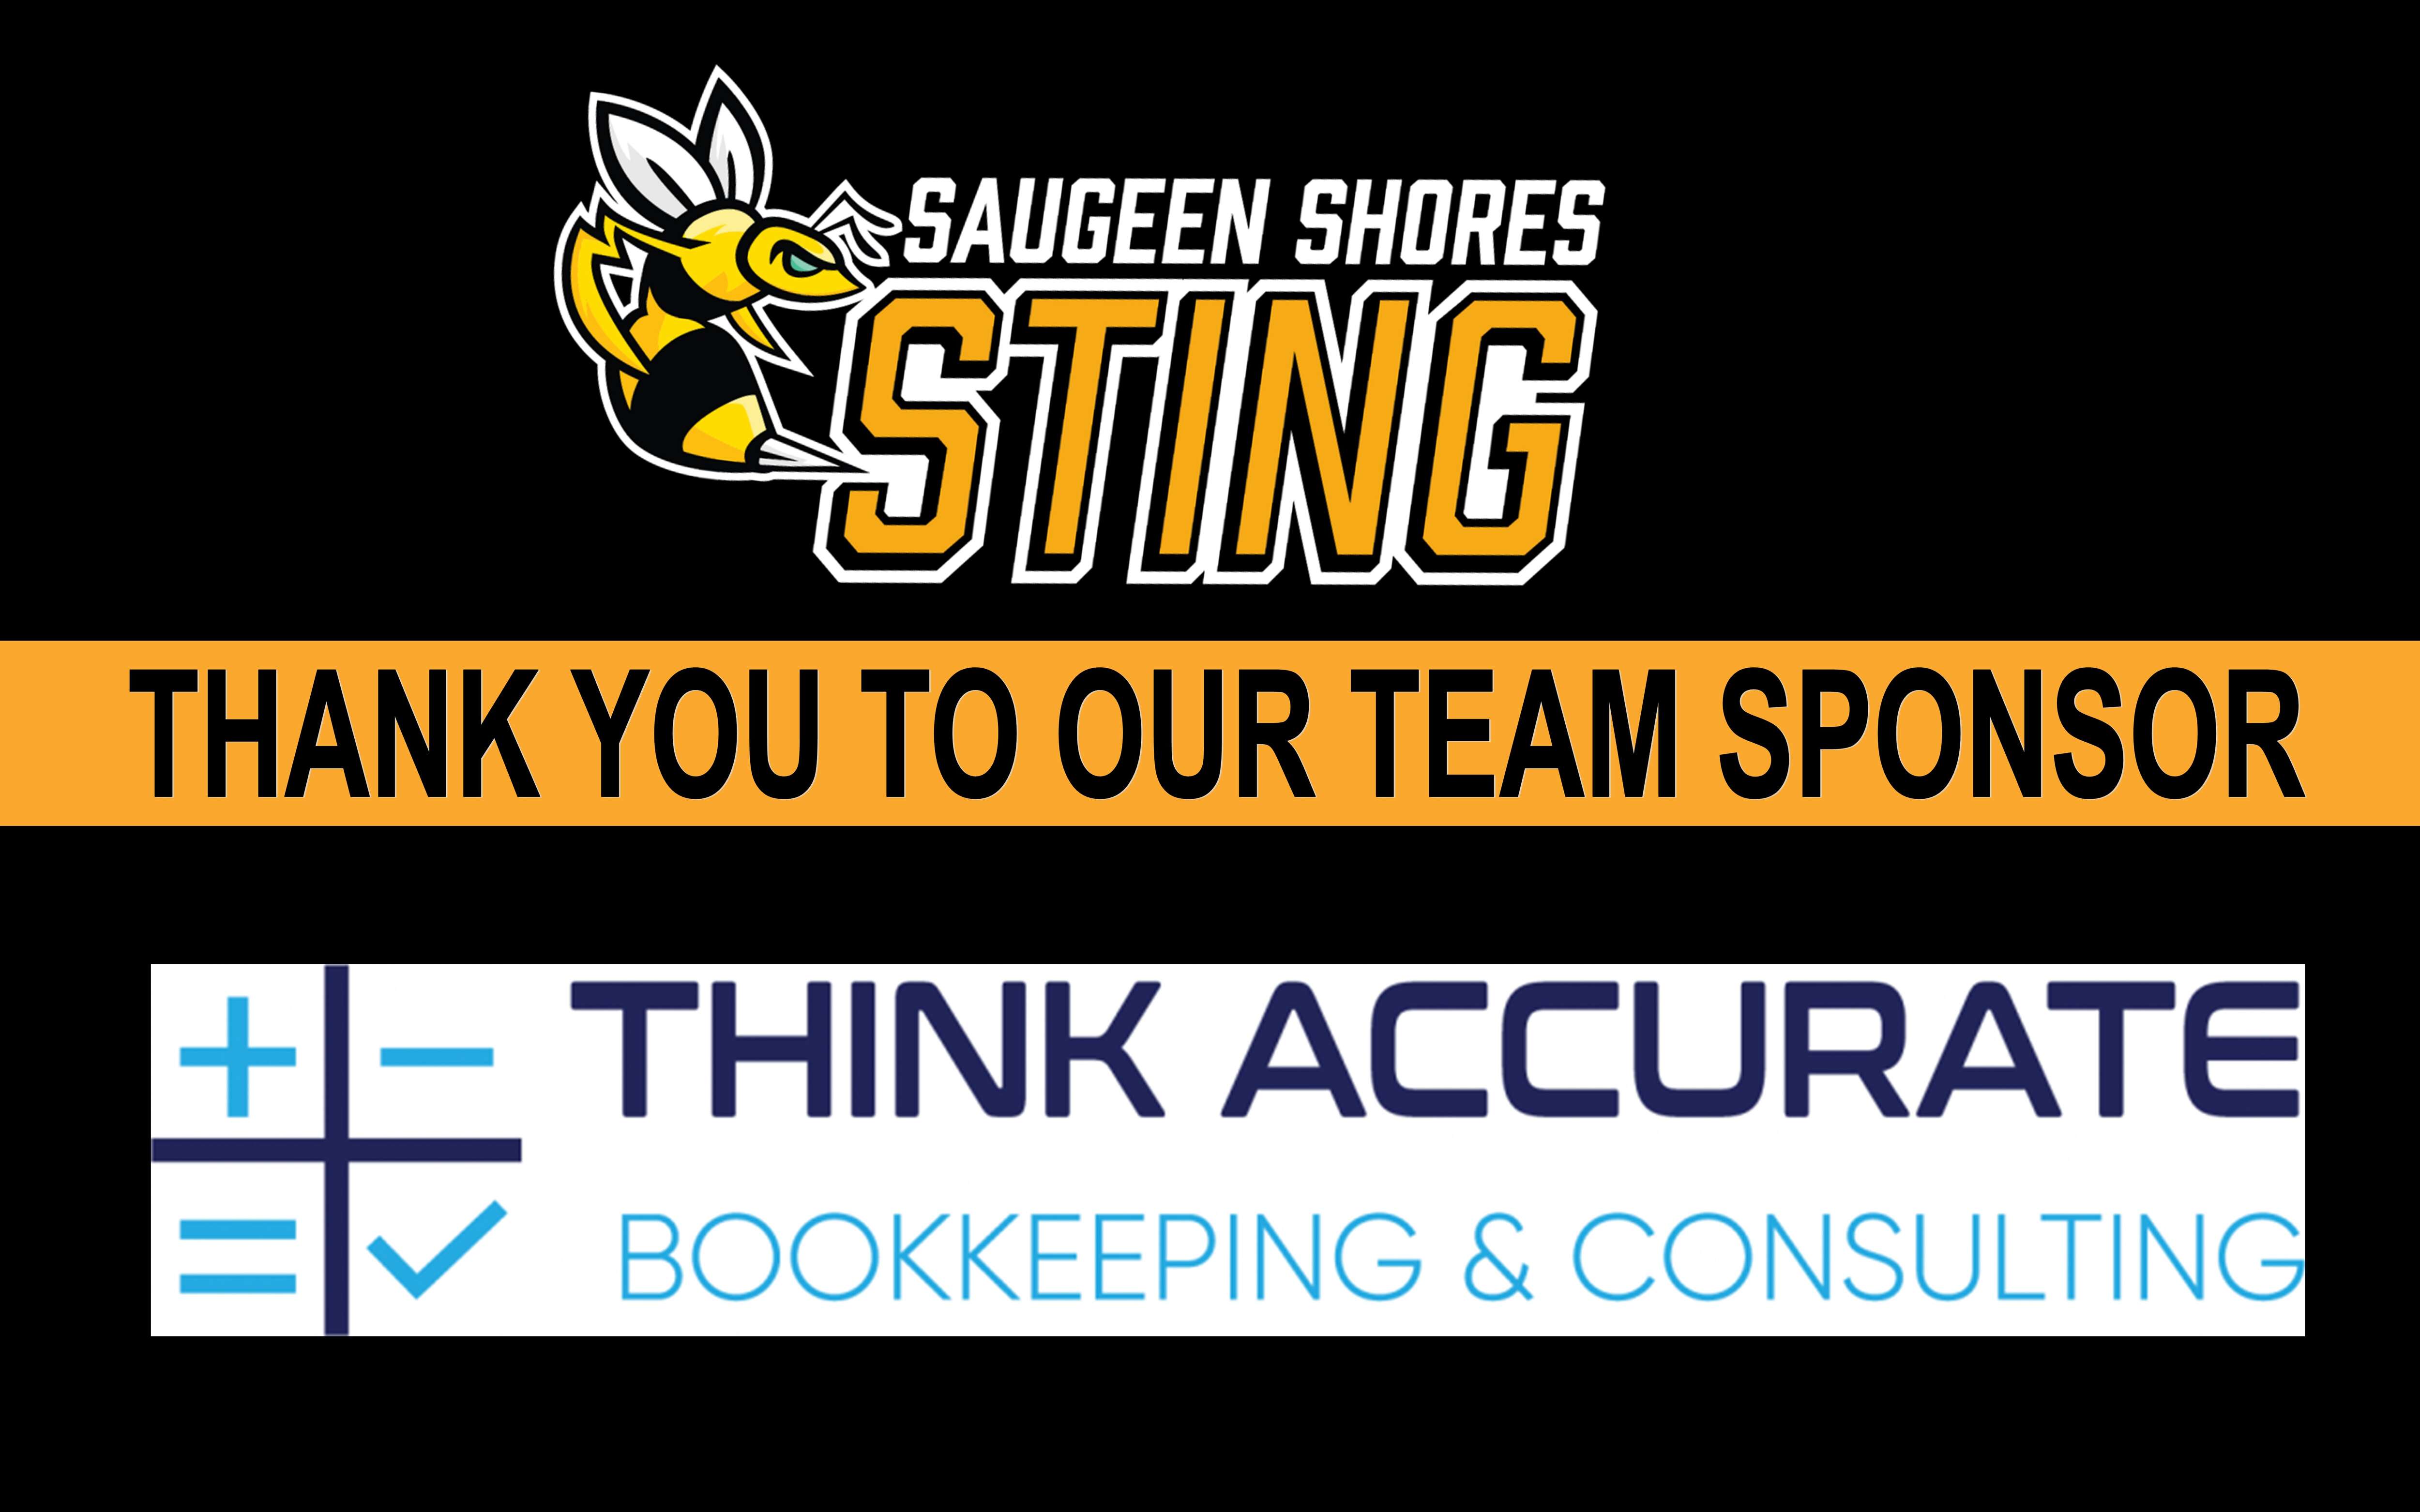 Think Accurate Bookkeeping & Consulting